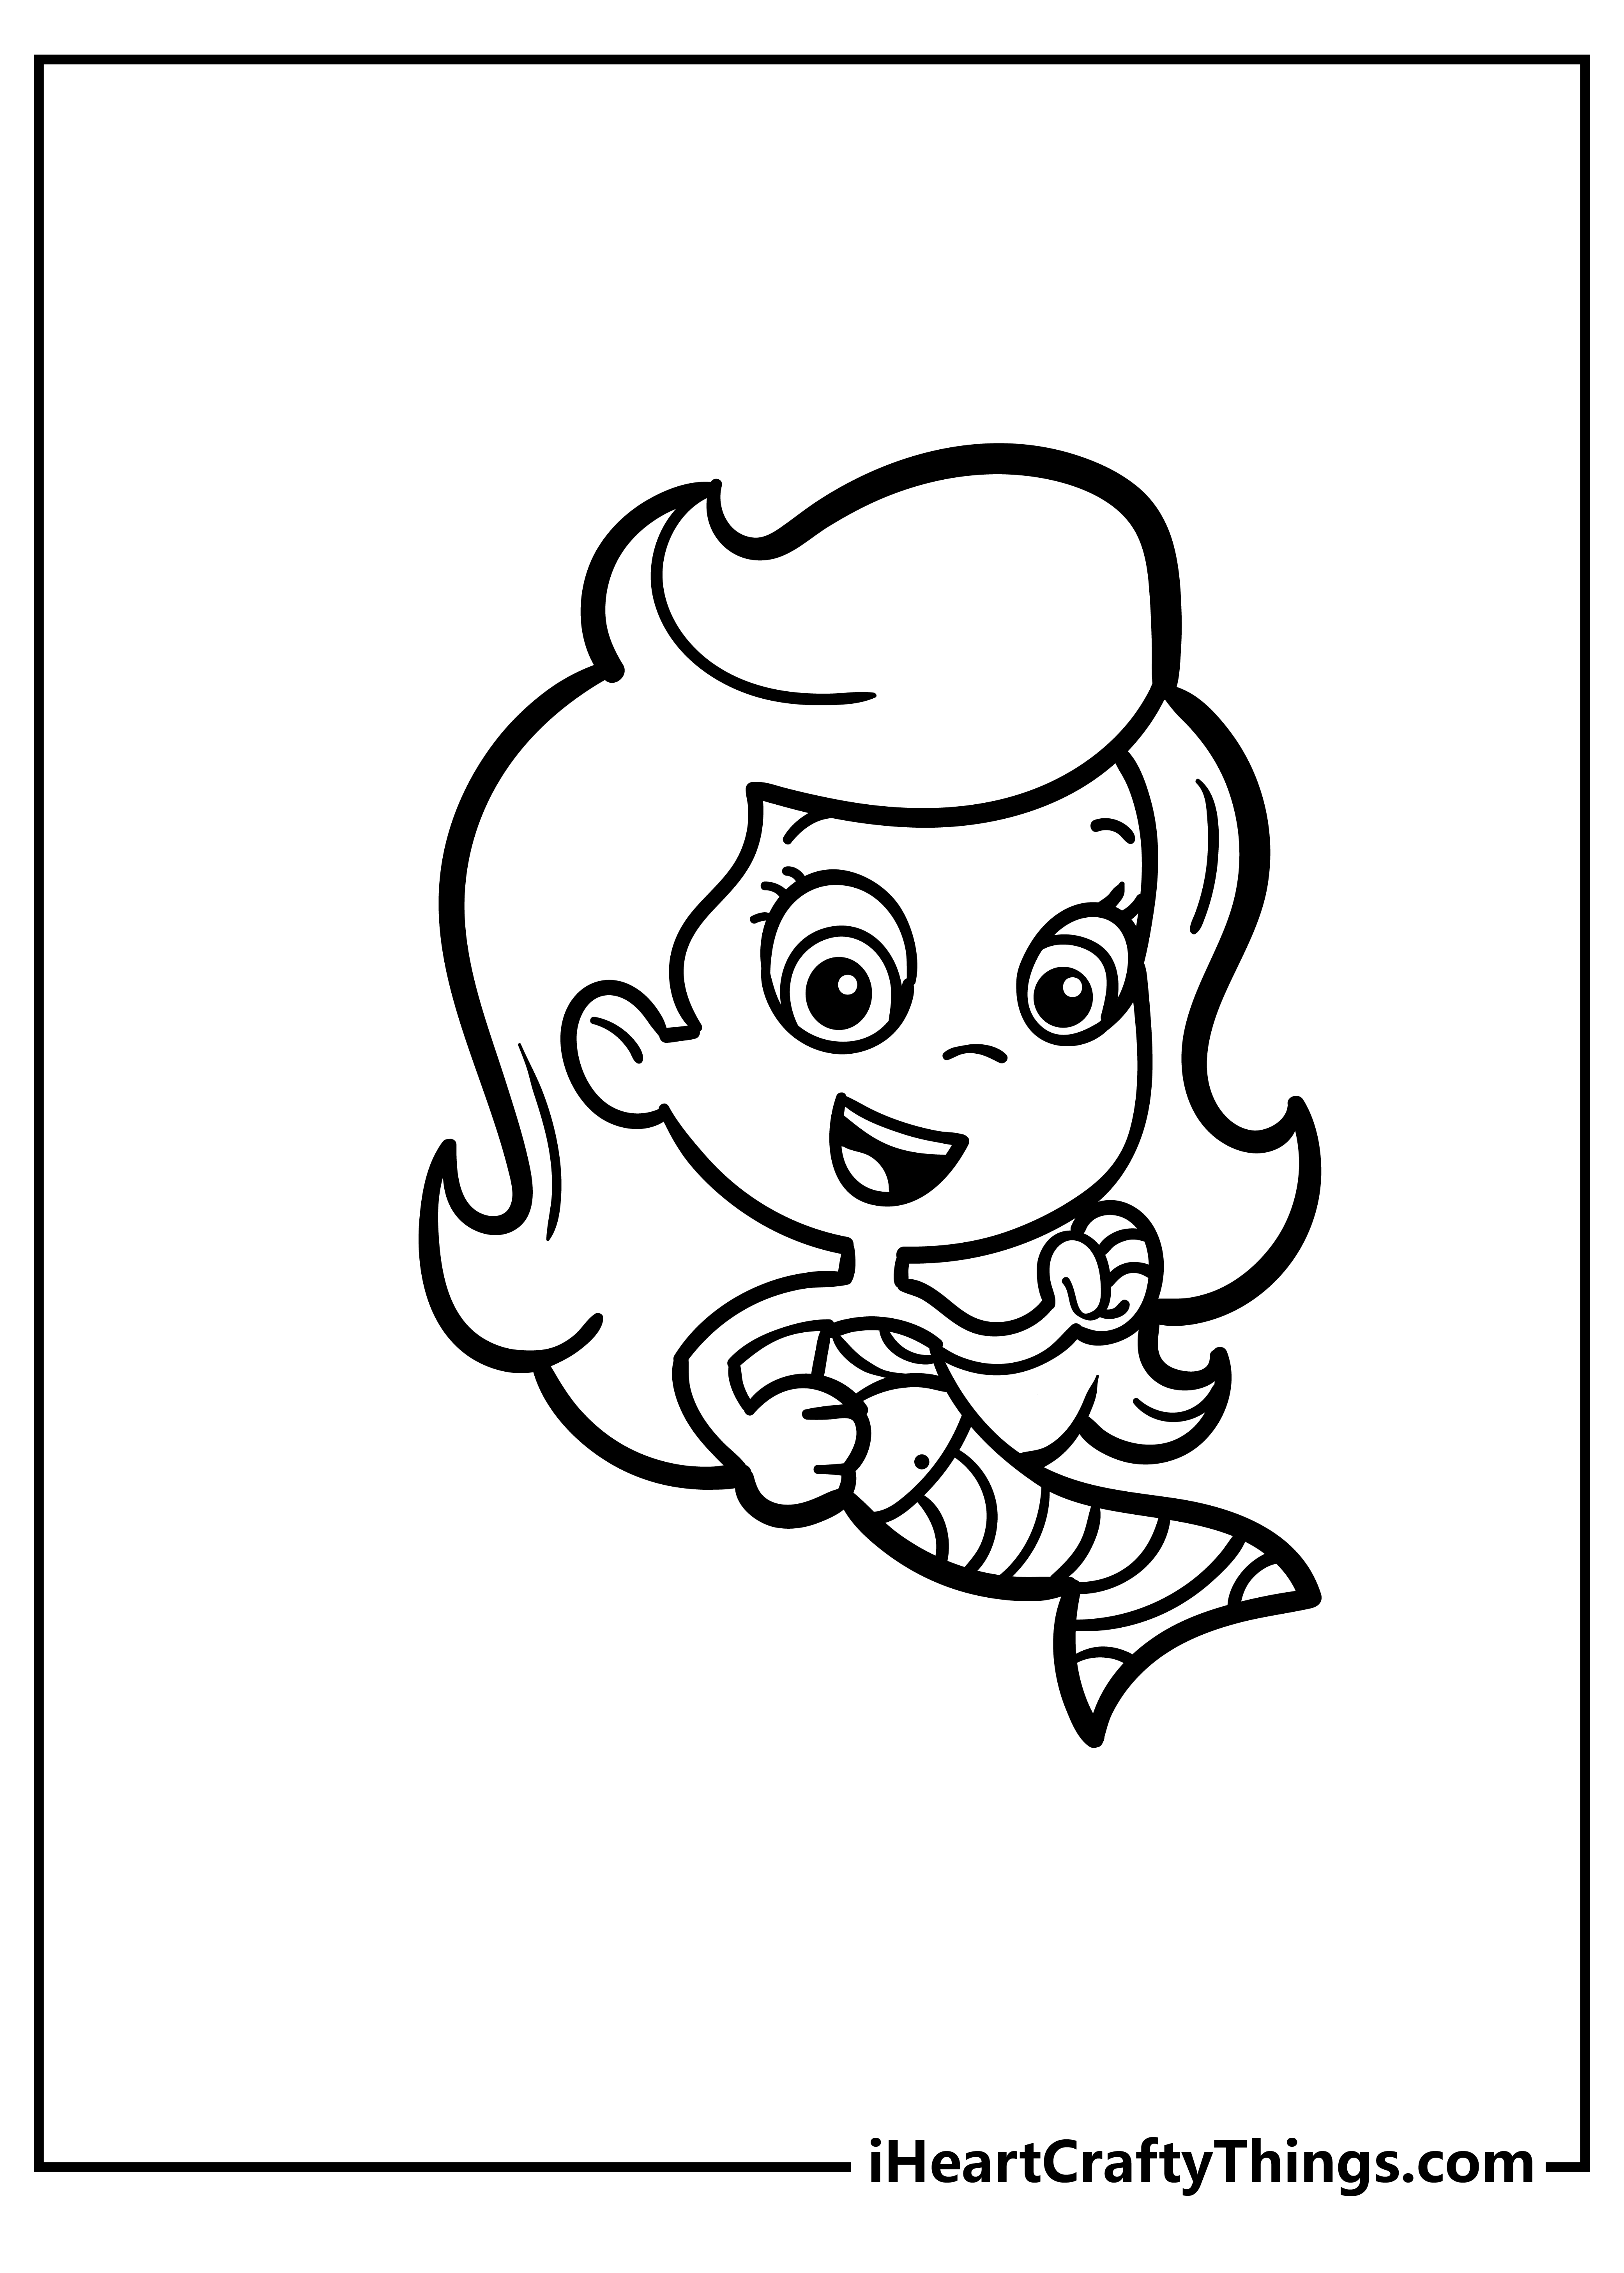 Bubble Guppies Coloring Book for kids free printable